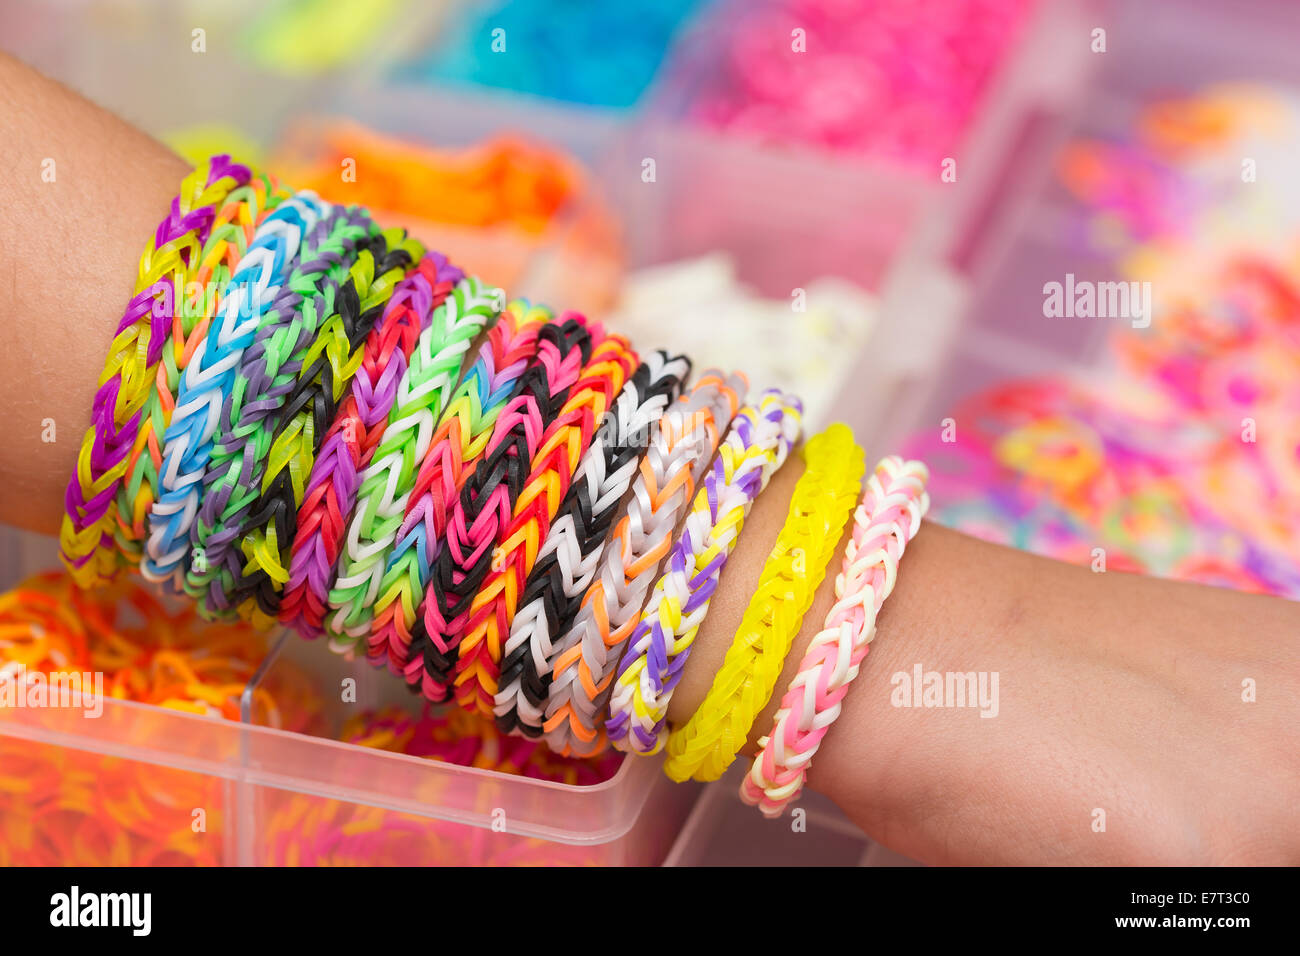 Colorful Rainbow loom bracelet rubber bands in a box Stock Photo - Alamy